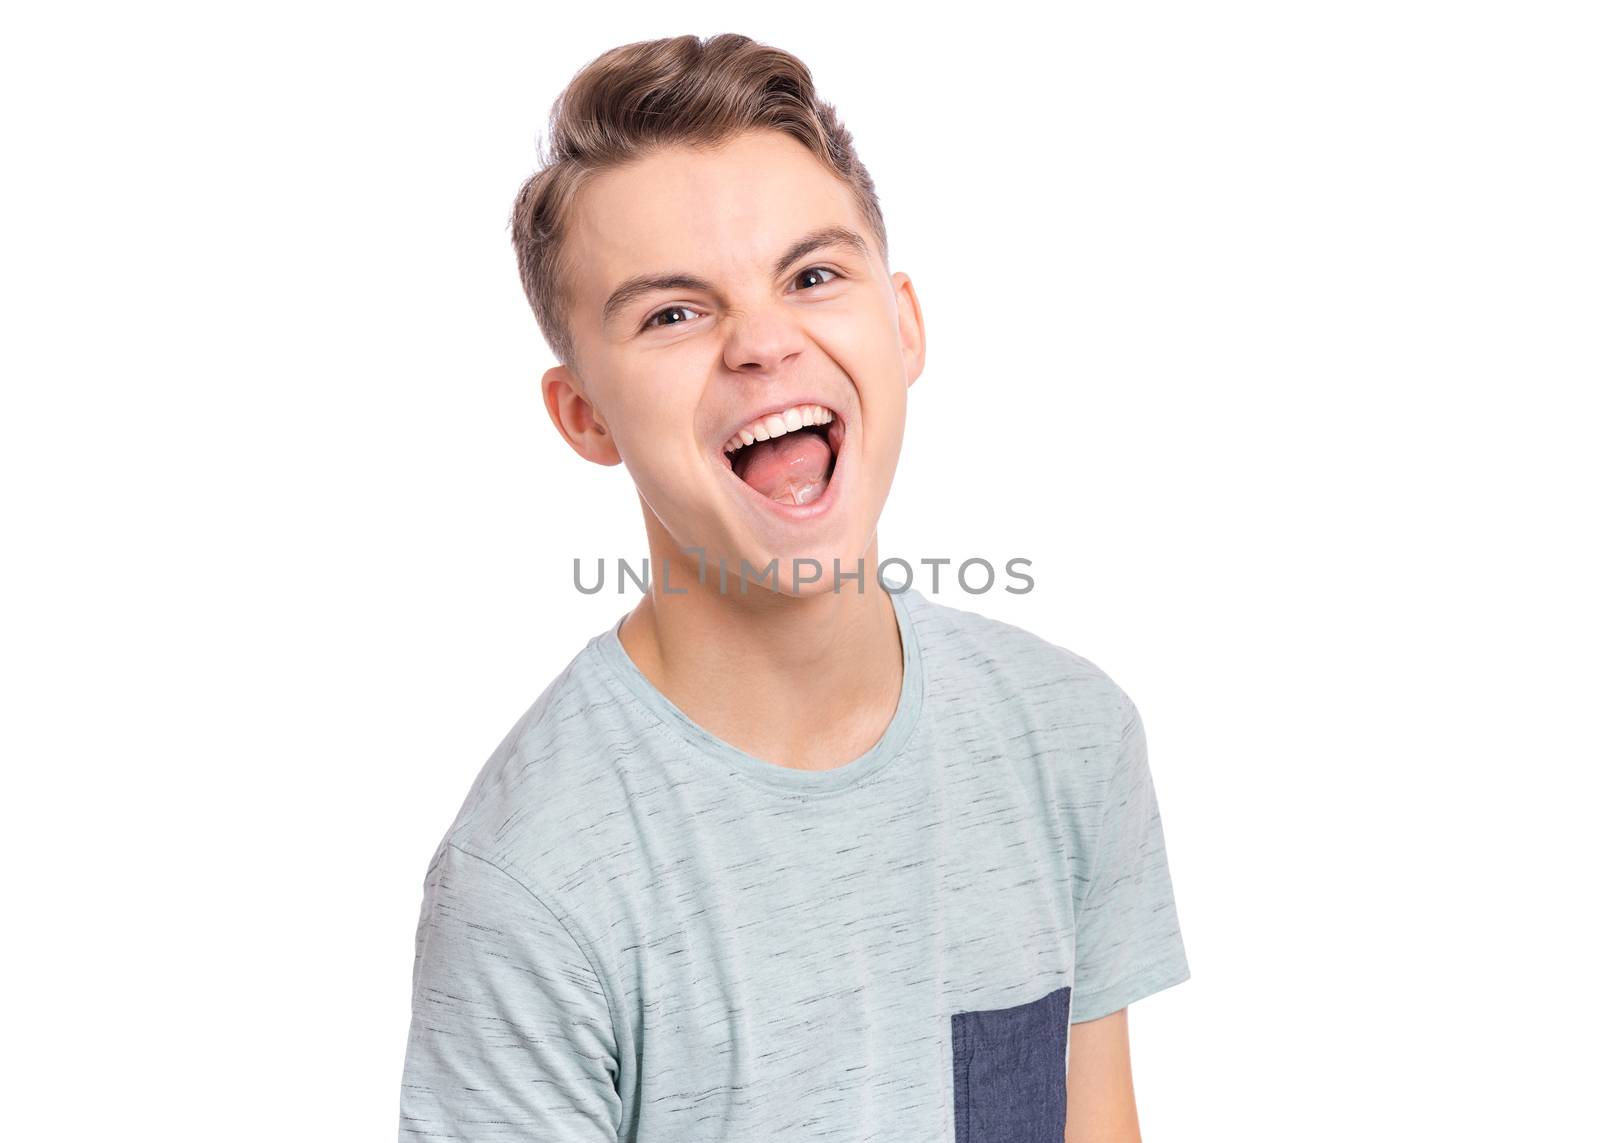 Handsome teen boy laughing looking very happy.